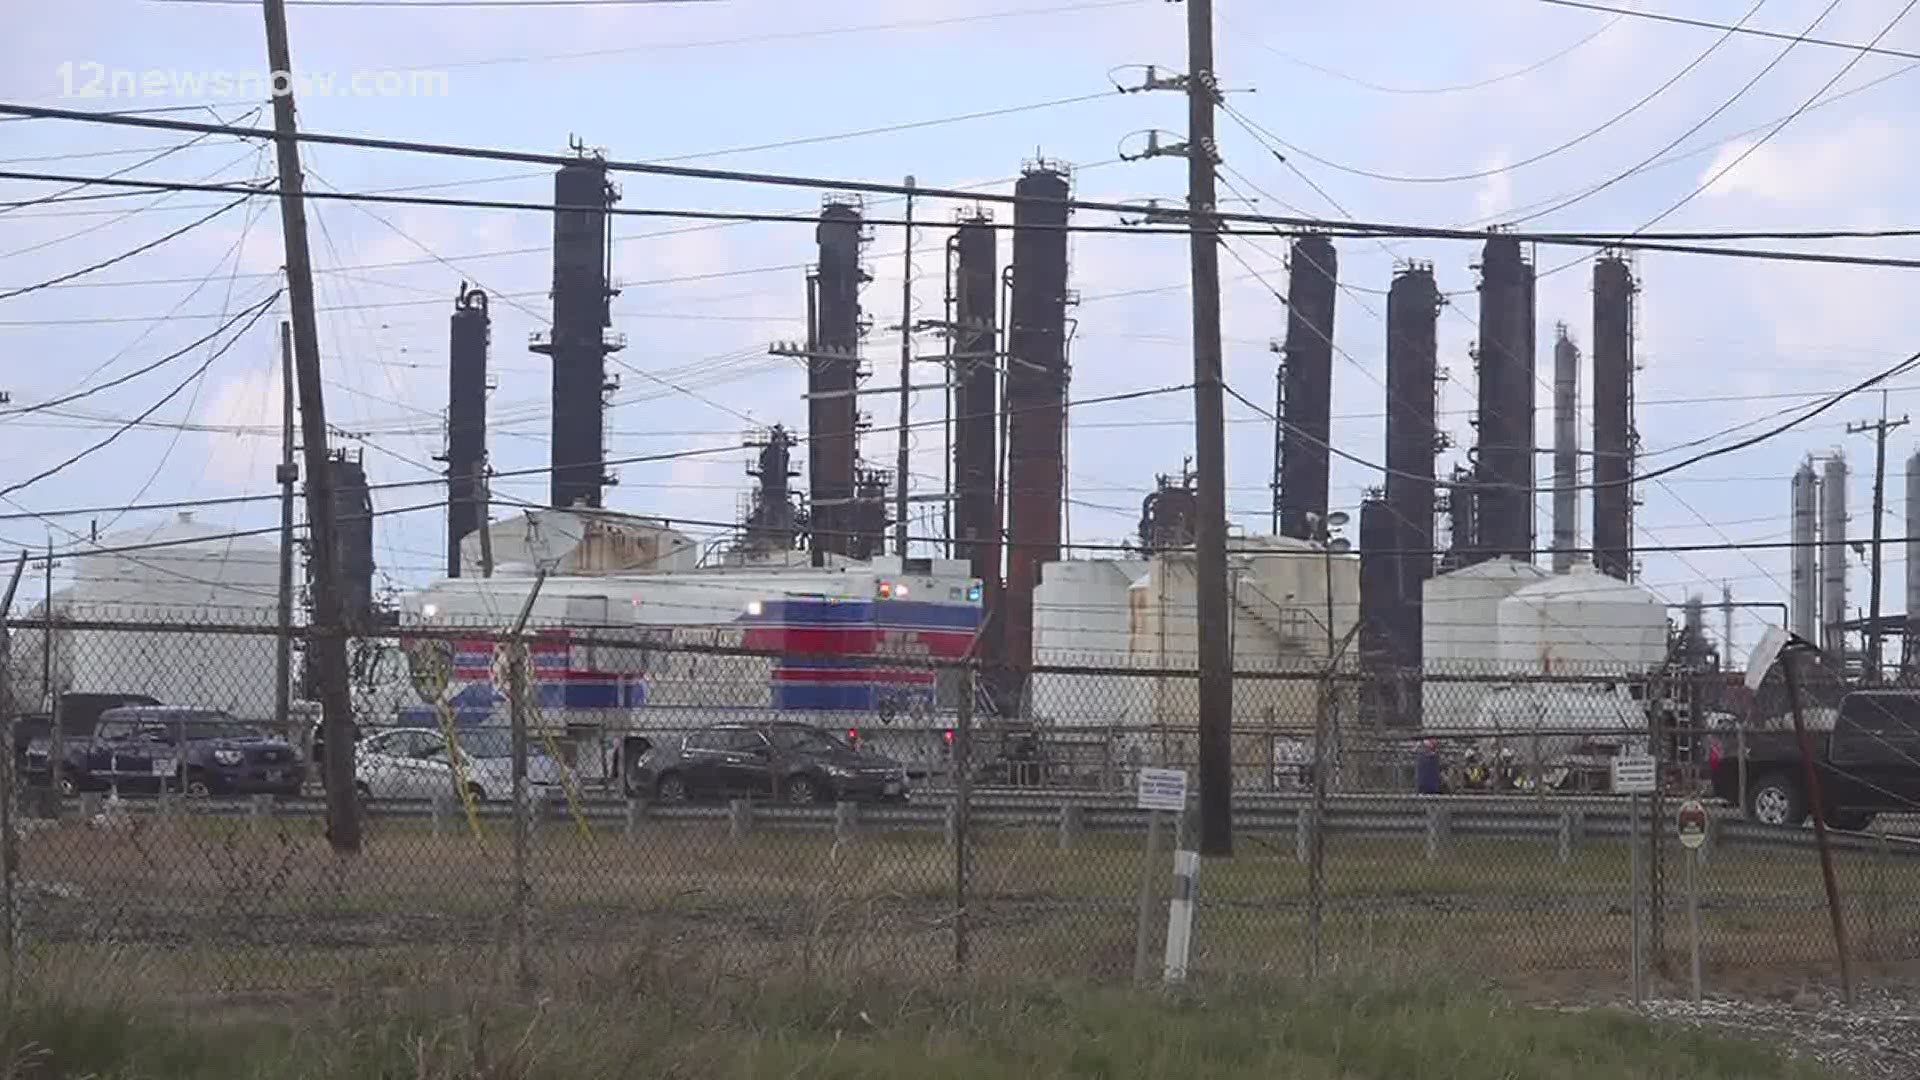 The plant will continue to test its alarm system each Wednesday at noon